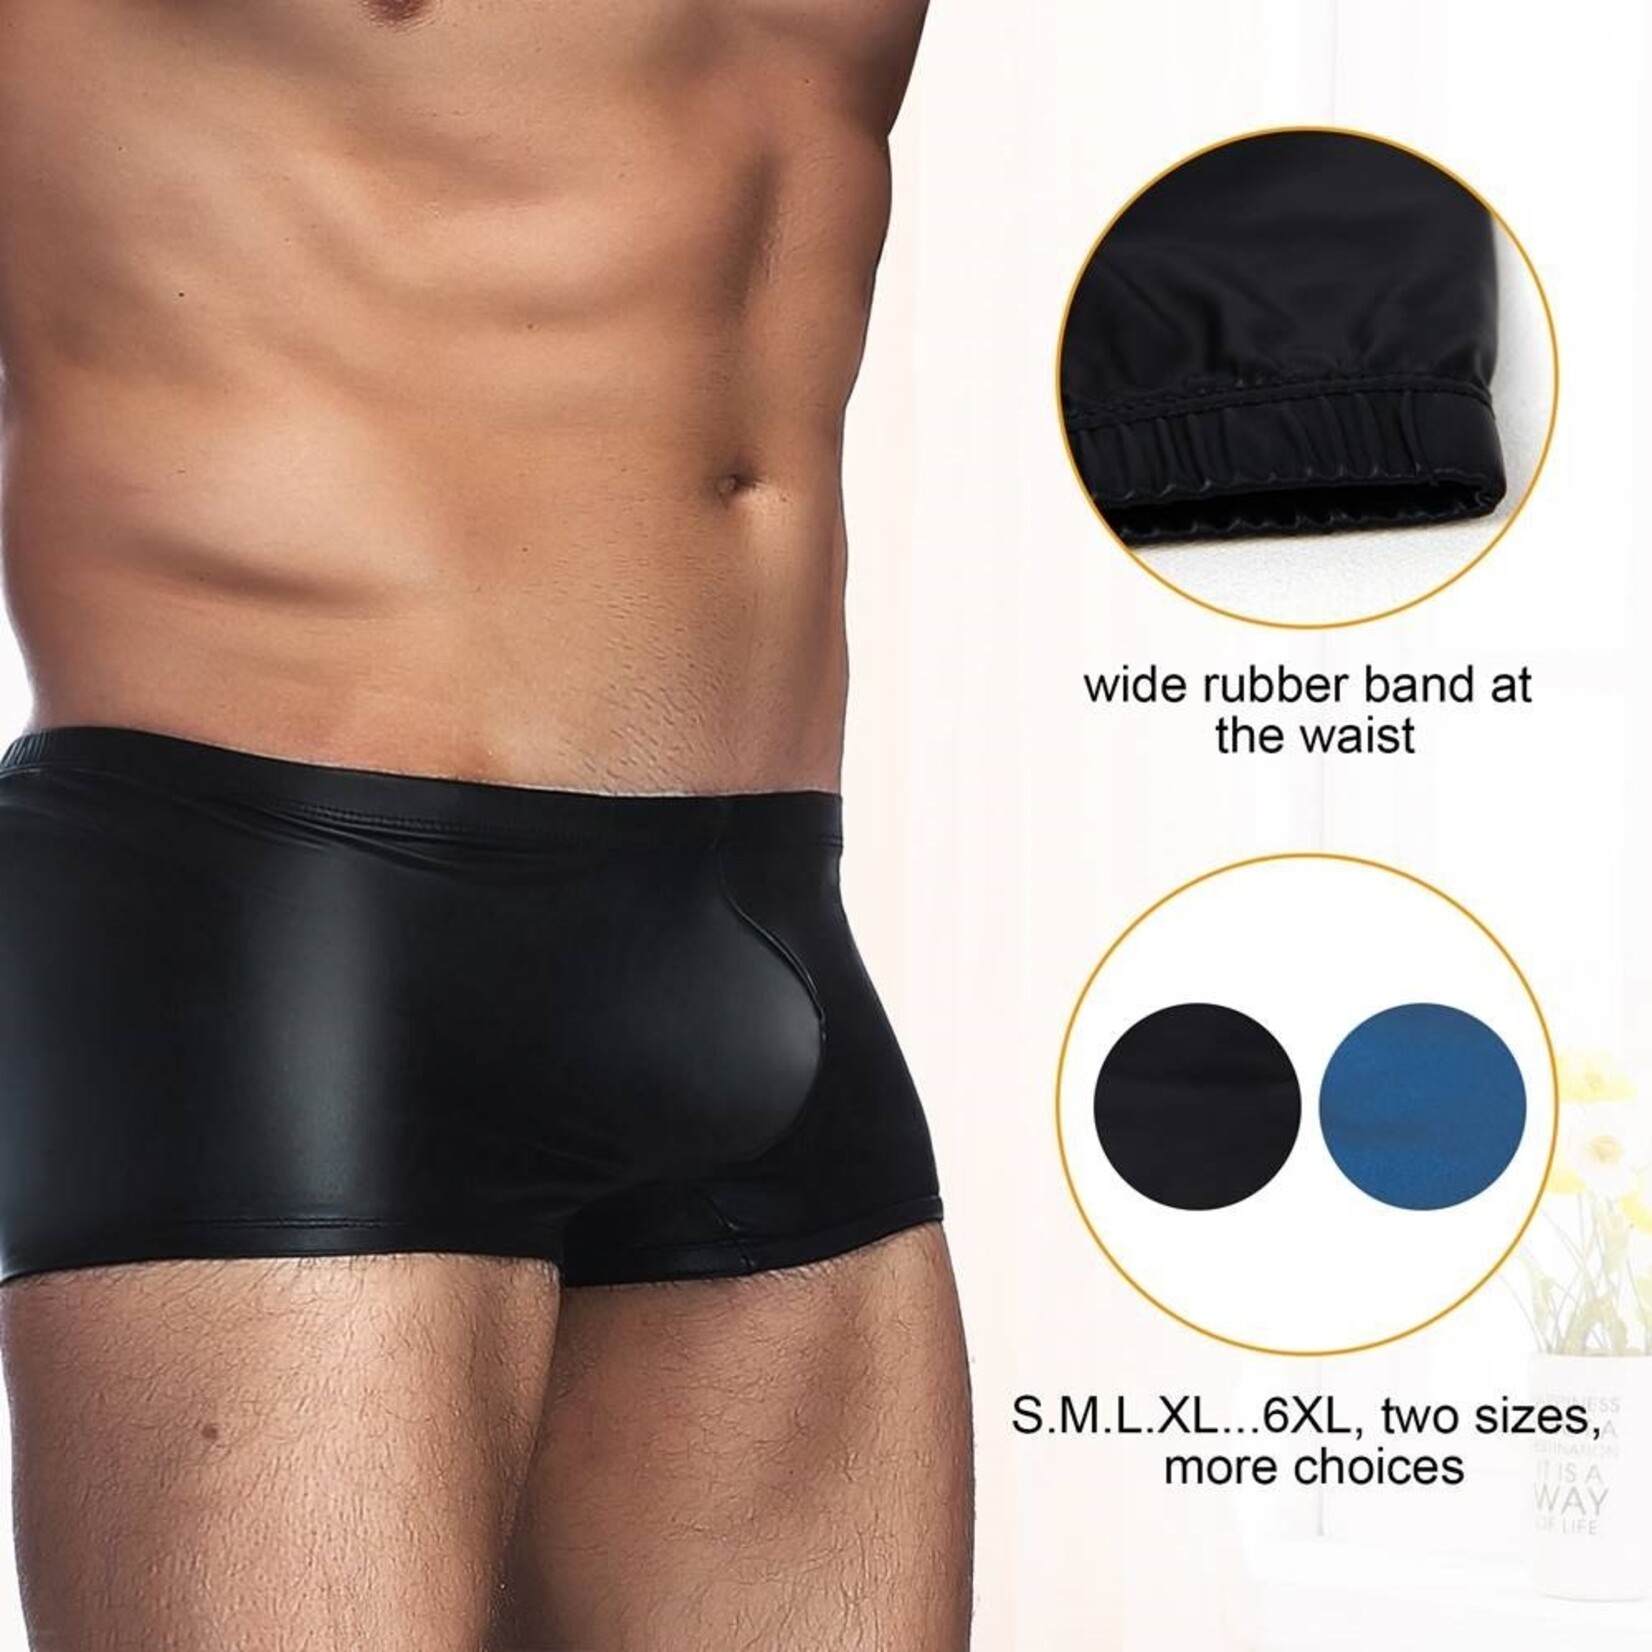 OH YEAH! -  BLACK LEATHER SEXY PANTY FOR MAN 4XL